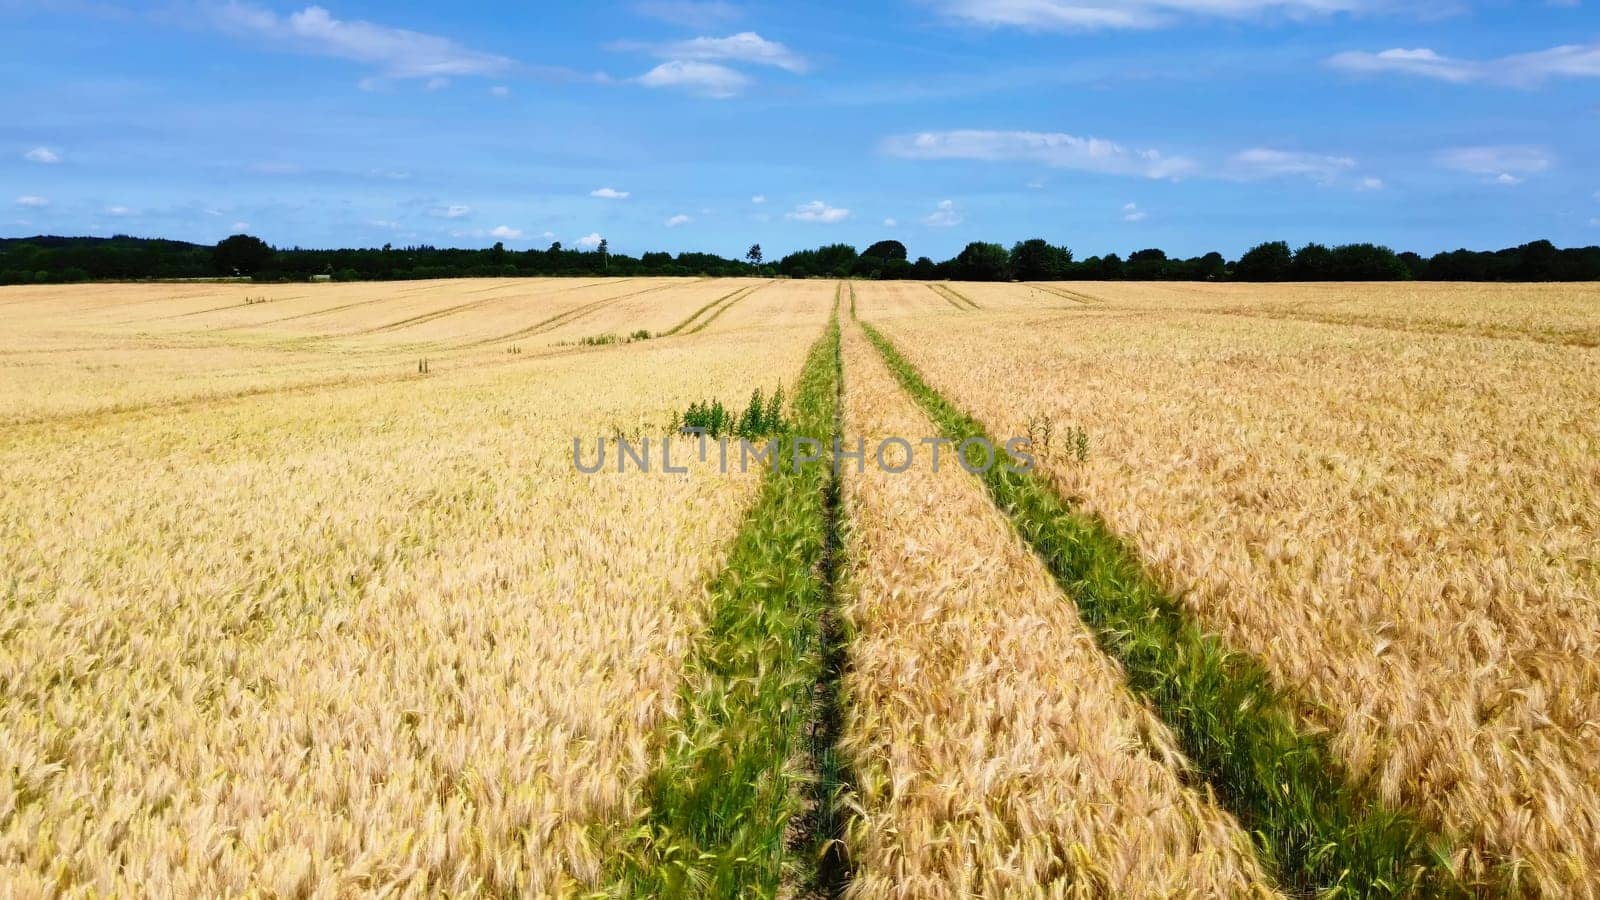 View over a wheat field in good weather found in northern germany. by MP_foto71